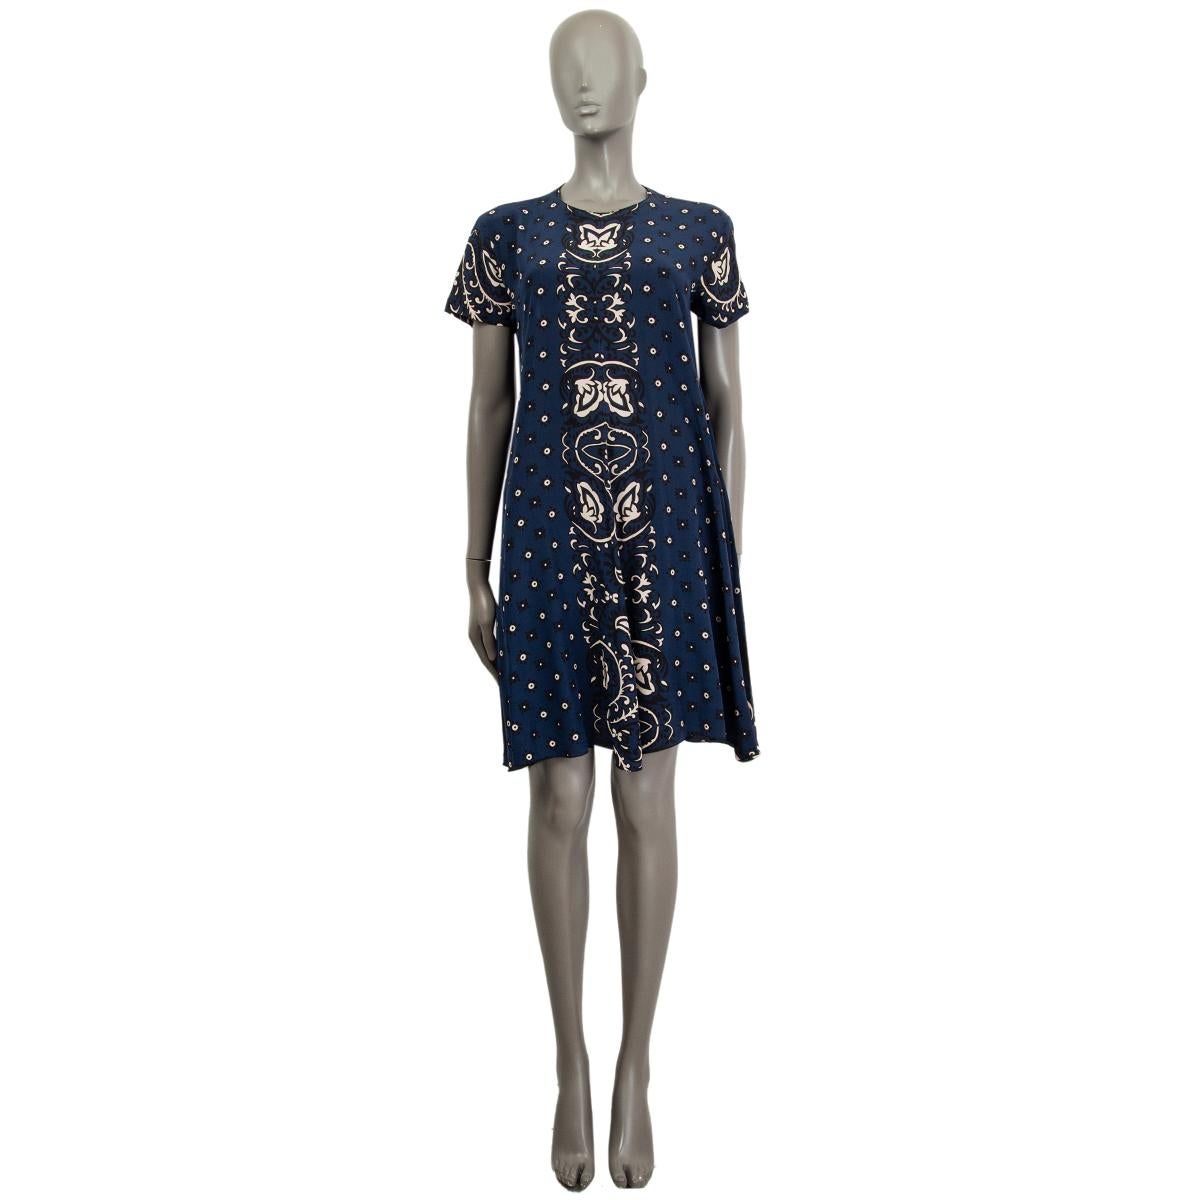 100% authentic RED by Valentino short sleeve bandana print dress in midnight blue, black and taupe silk (100%) with a round neck  and side slit pockets. Closes on the back with a keyhole button. Unlined. Has been worn and is in excellent condition.